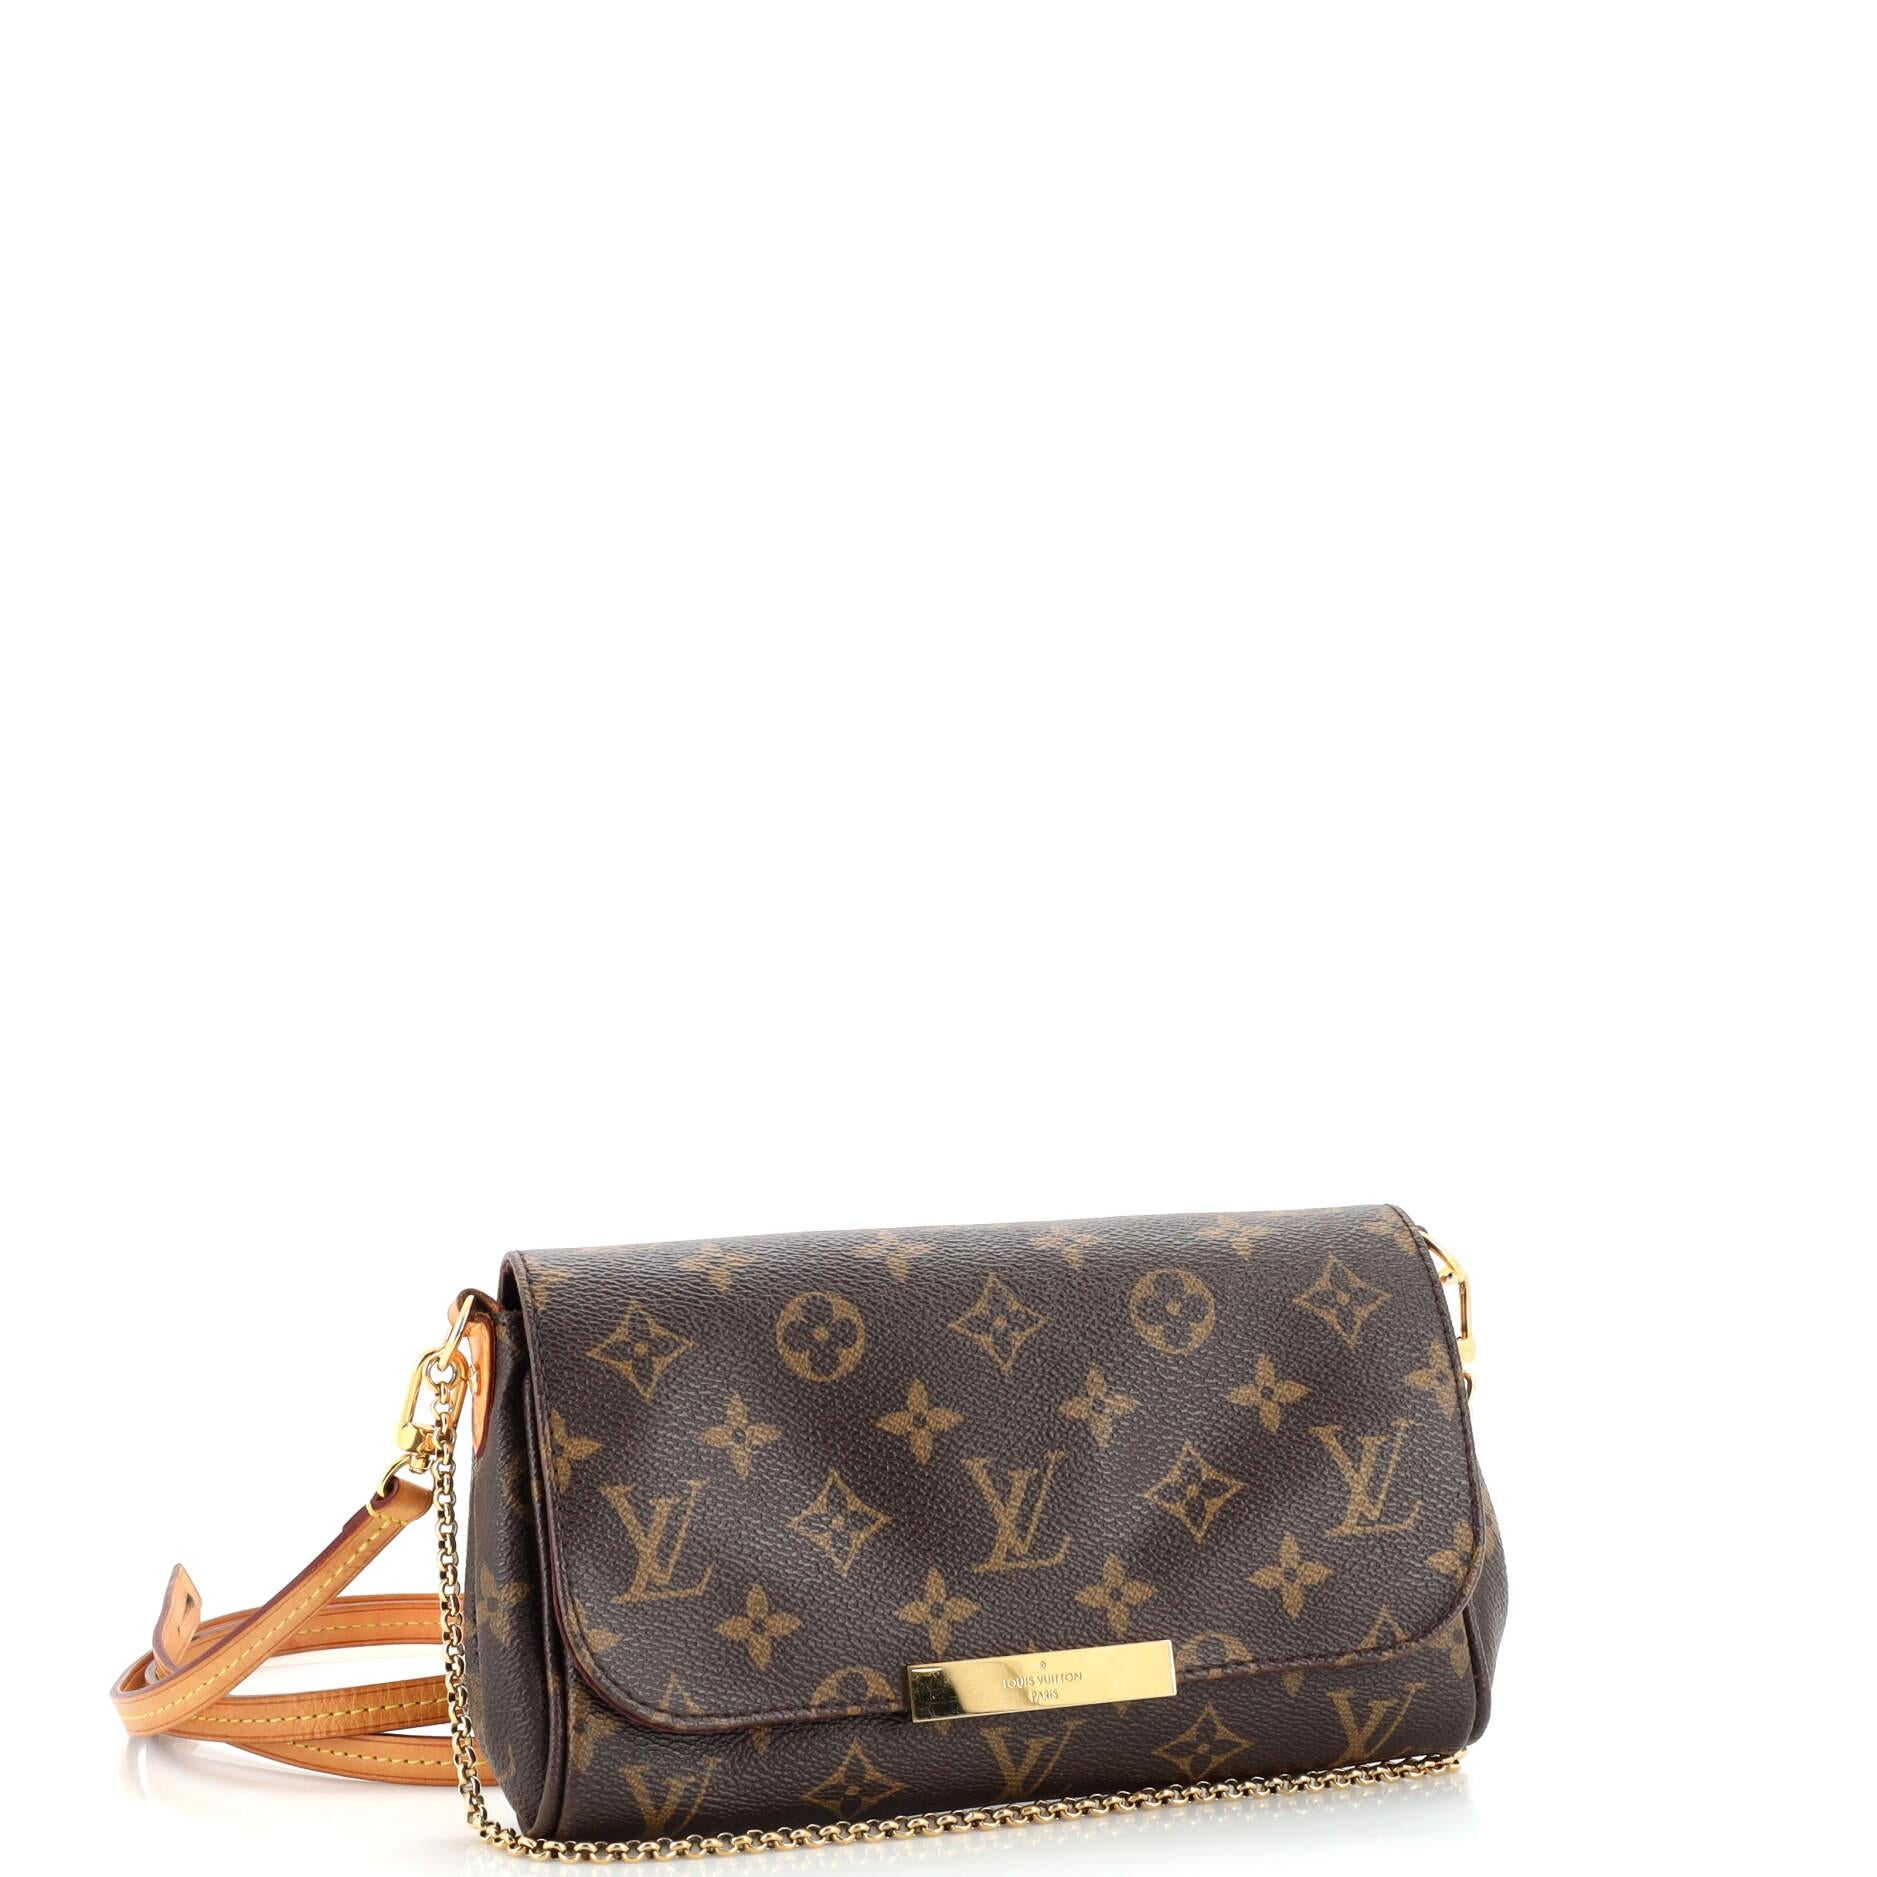 Louis Vuitton Favorite Pm - 4 For Sale on 1stDibs